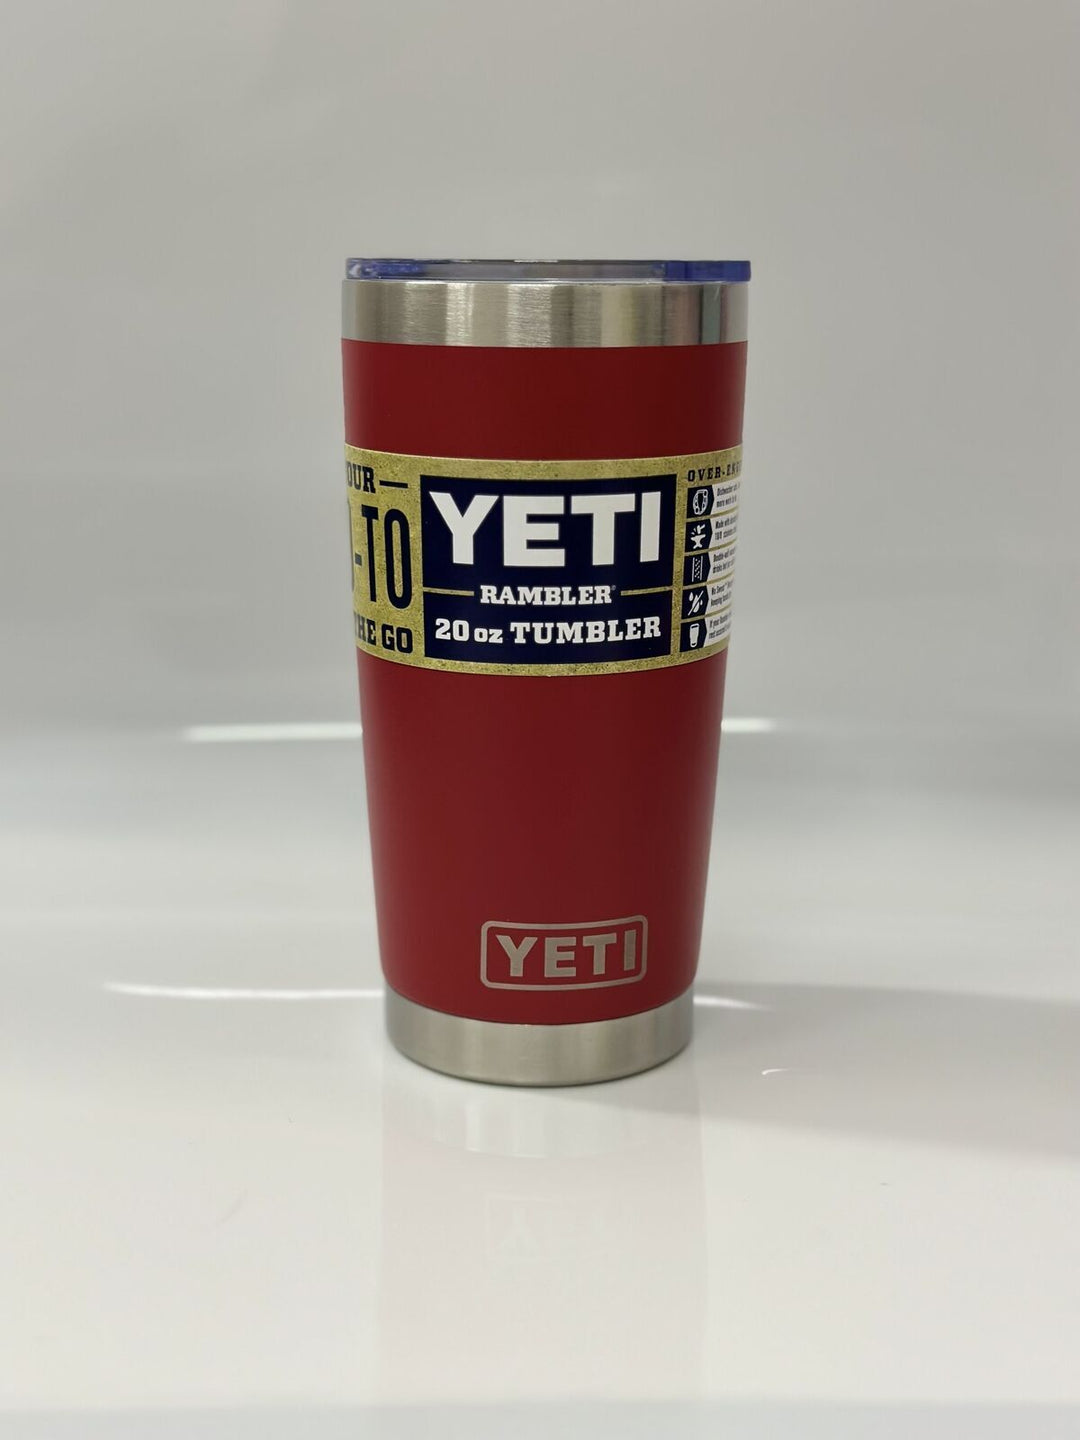 YETI Rambler 20 oz Tumbler, Stainless Steel, Vacuum Insulated with MagSlider Lid, Harvest Red